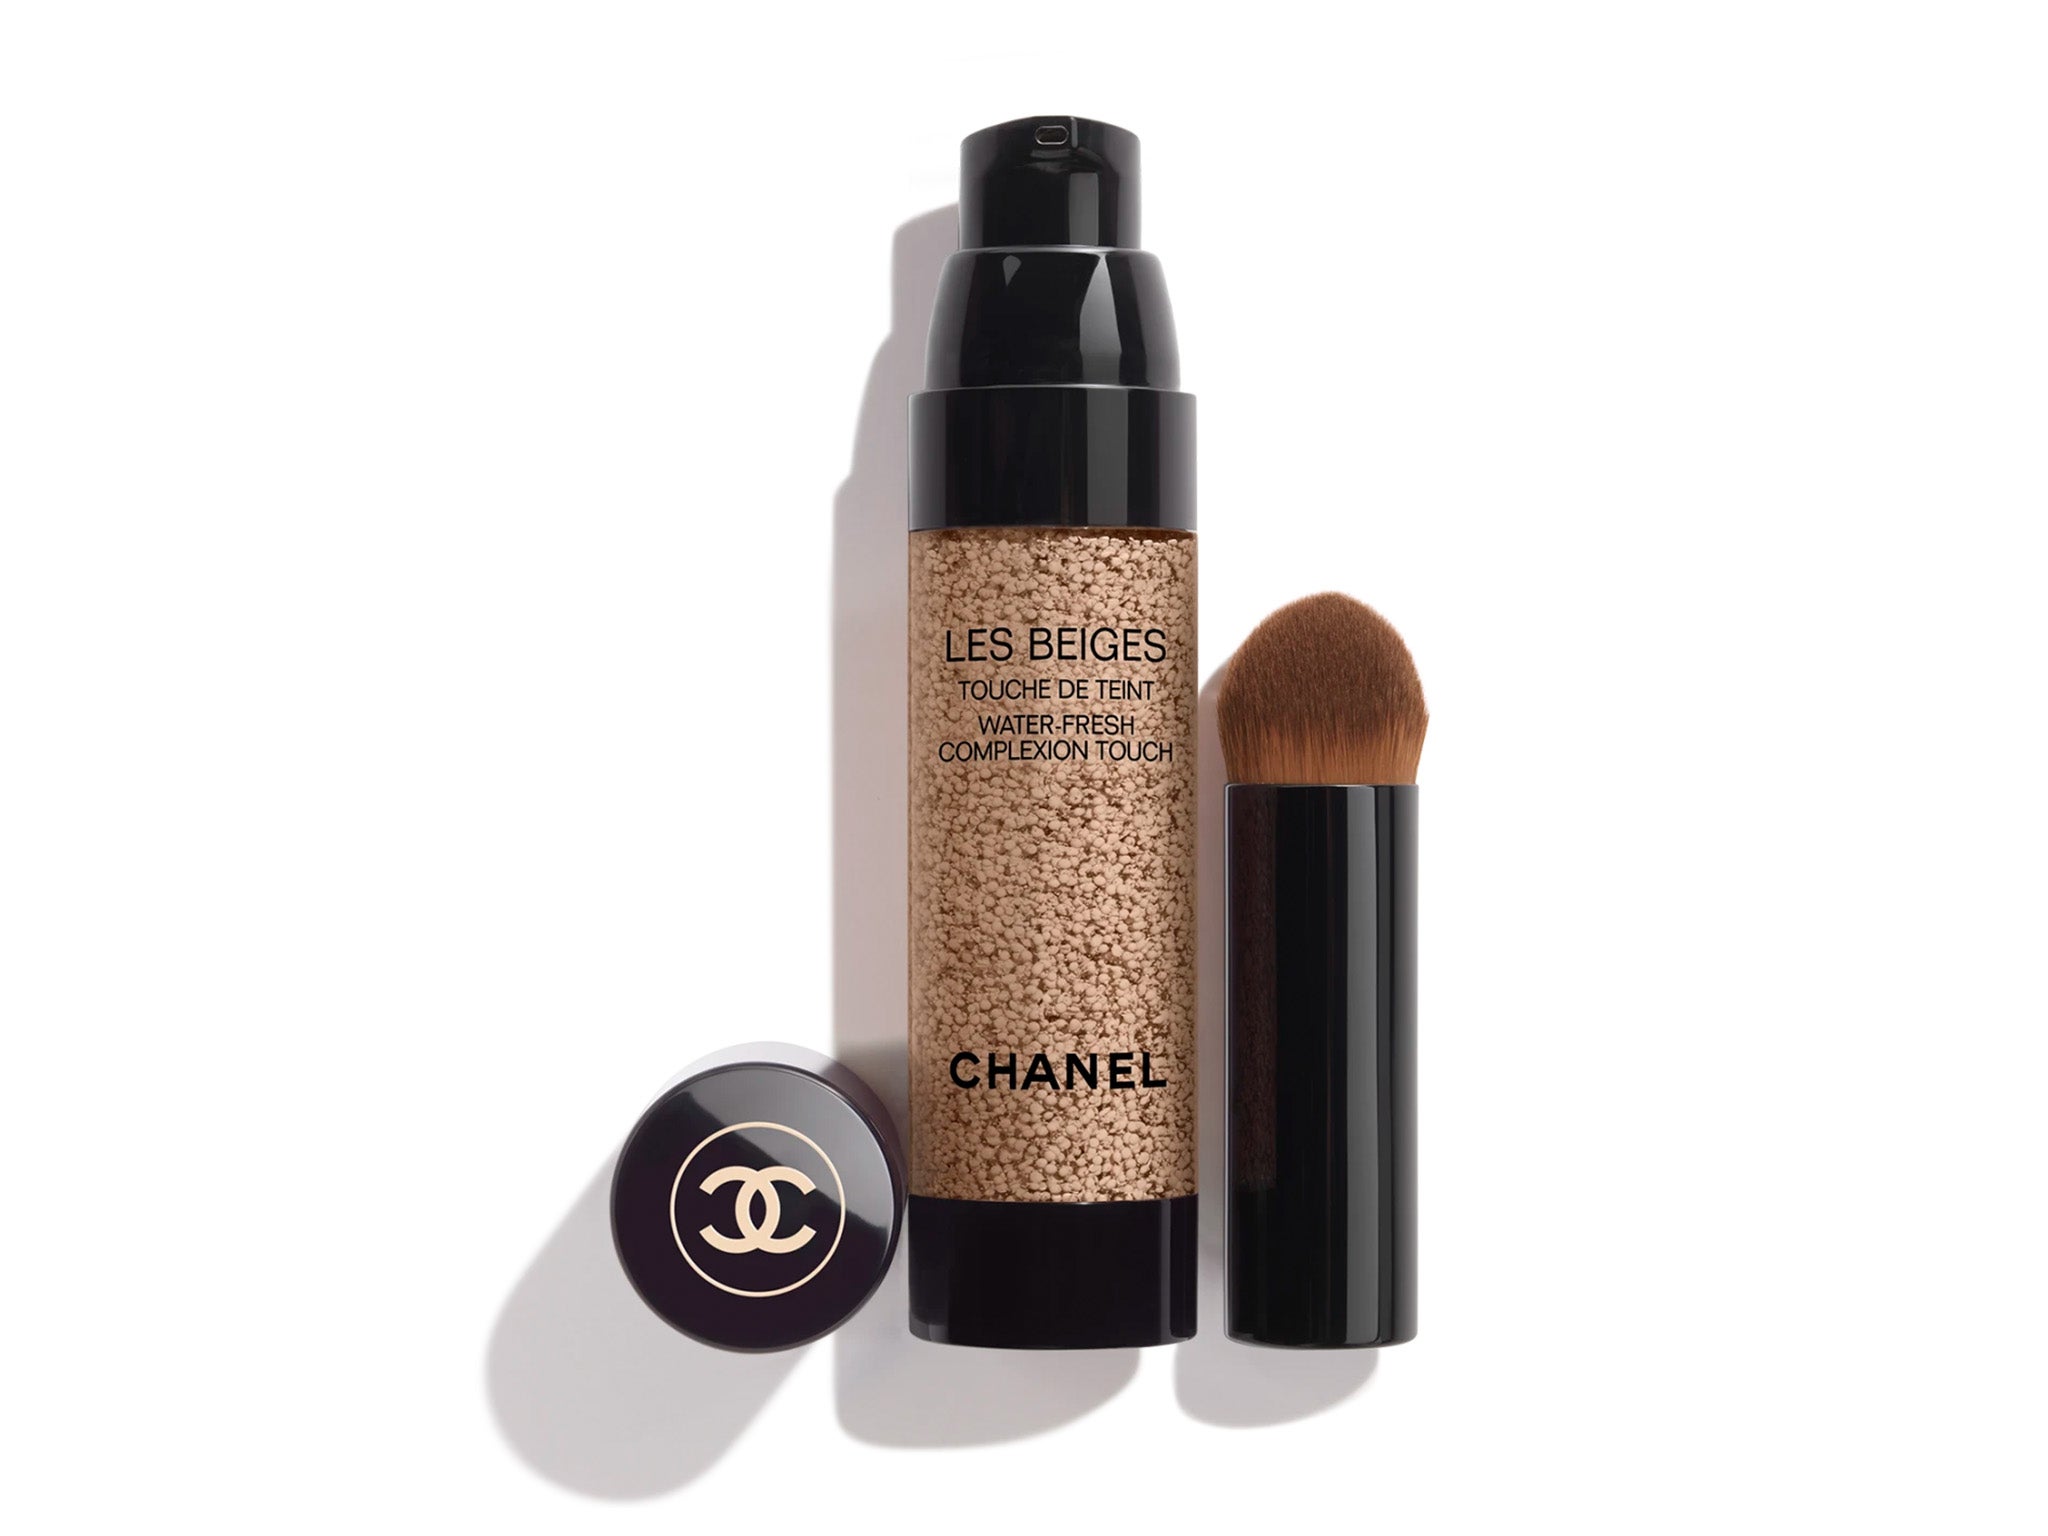 Kem Nền Chanel Les Beiges Healthy Glow Foundation 30ml  SonAuth Official